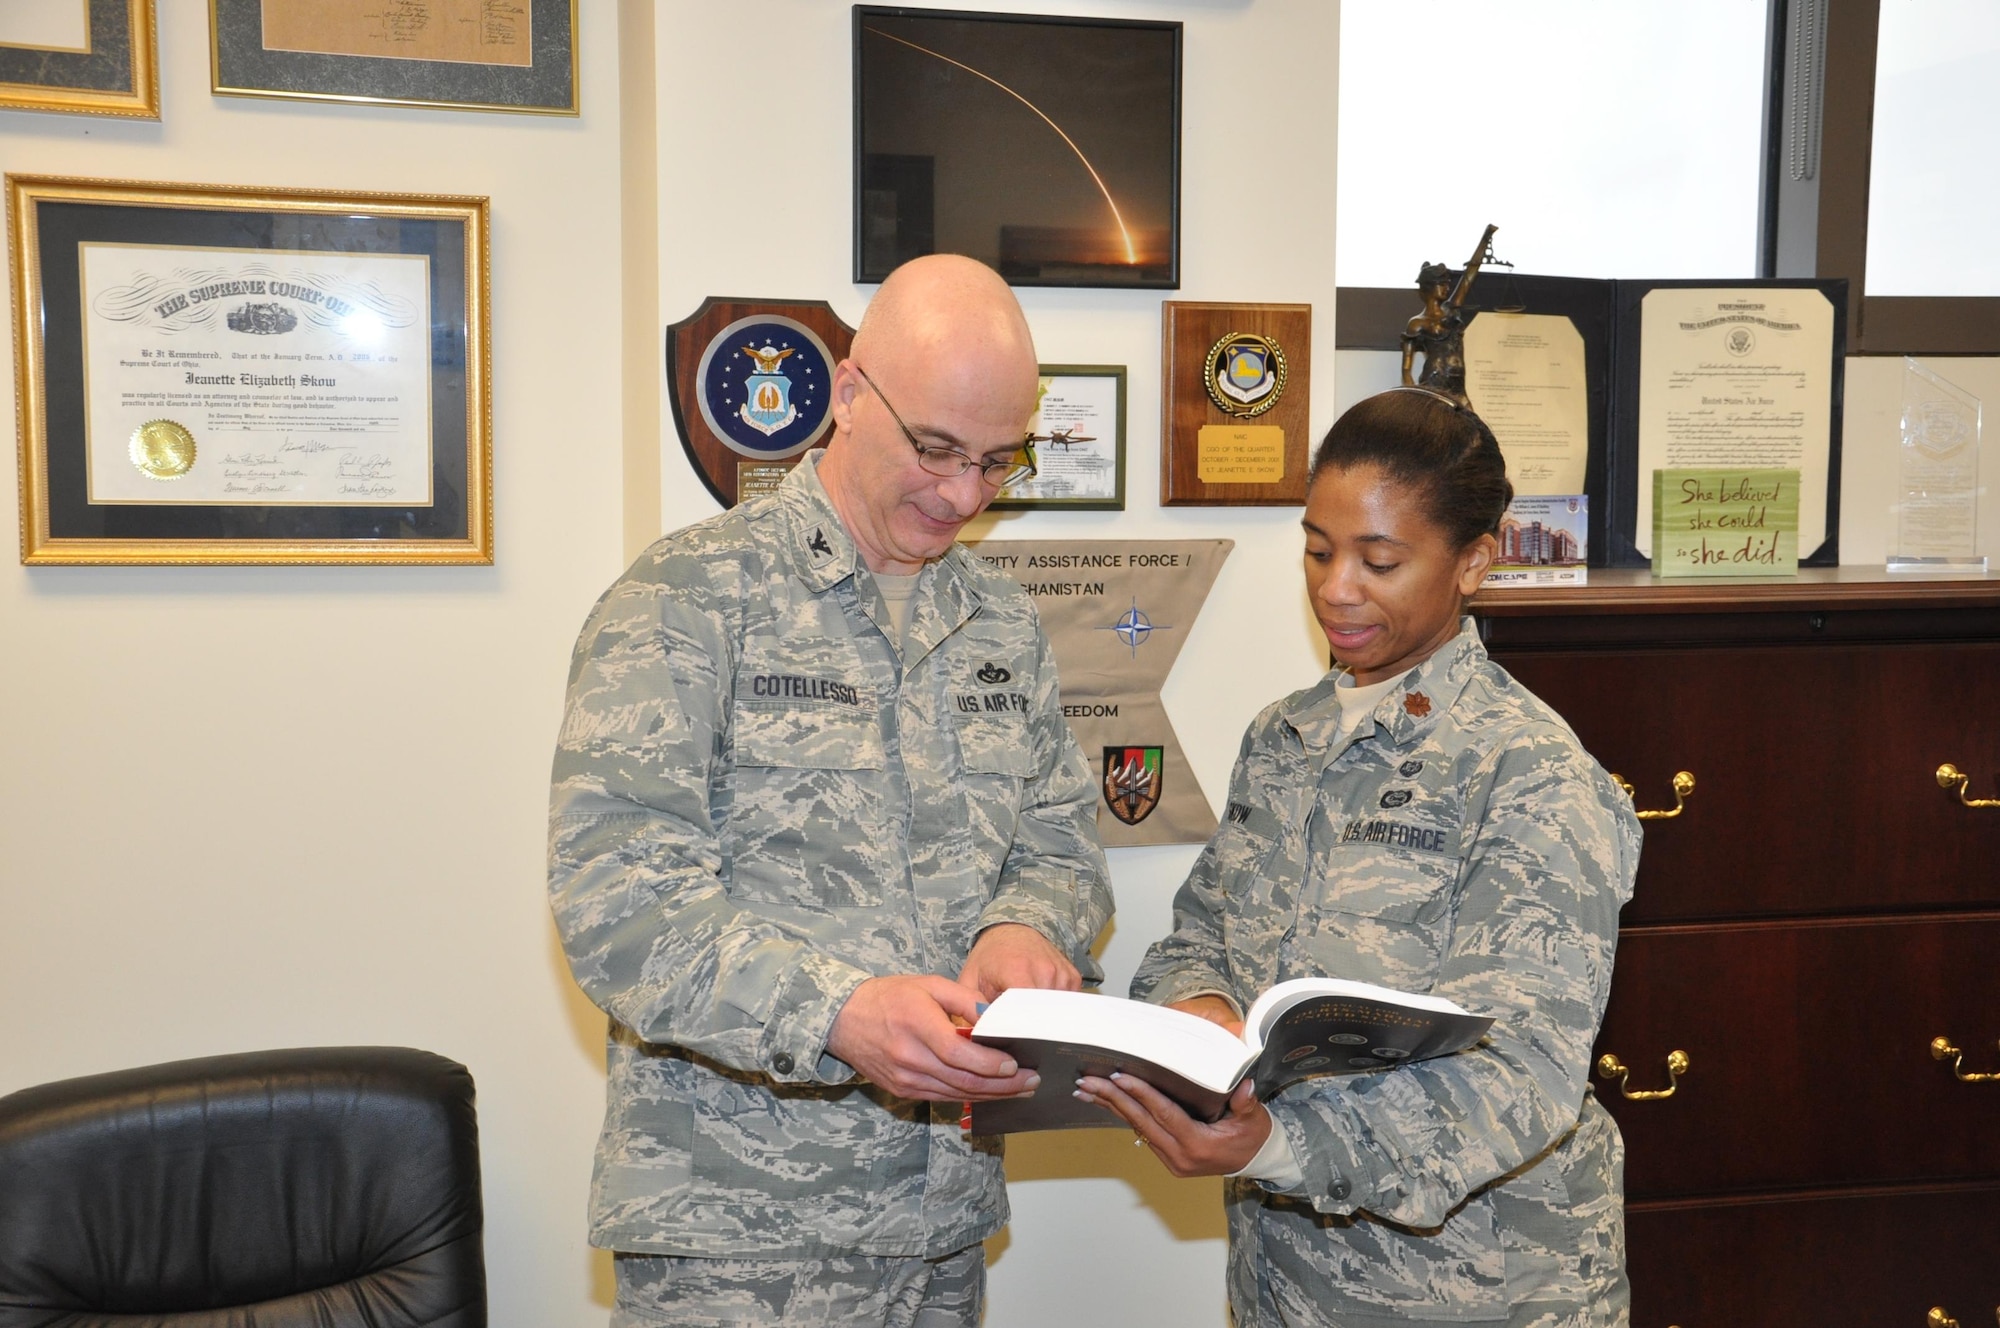 Col. Paul Cotellesso, Air University Detachment 1 Commander/
Director of Staff at the Air Force Institute of Technology, reviews a section of the Uniform Code of Military Justice with Maj. Jeanette Skow, AFIT Staff Judge Advocate. (U.S. Air Force photo/Bryan Ripple)